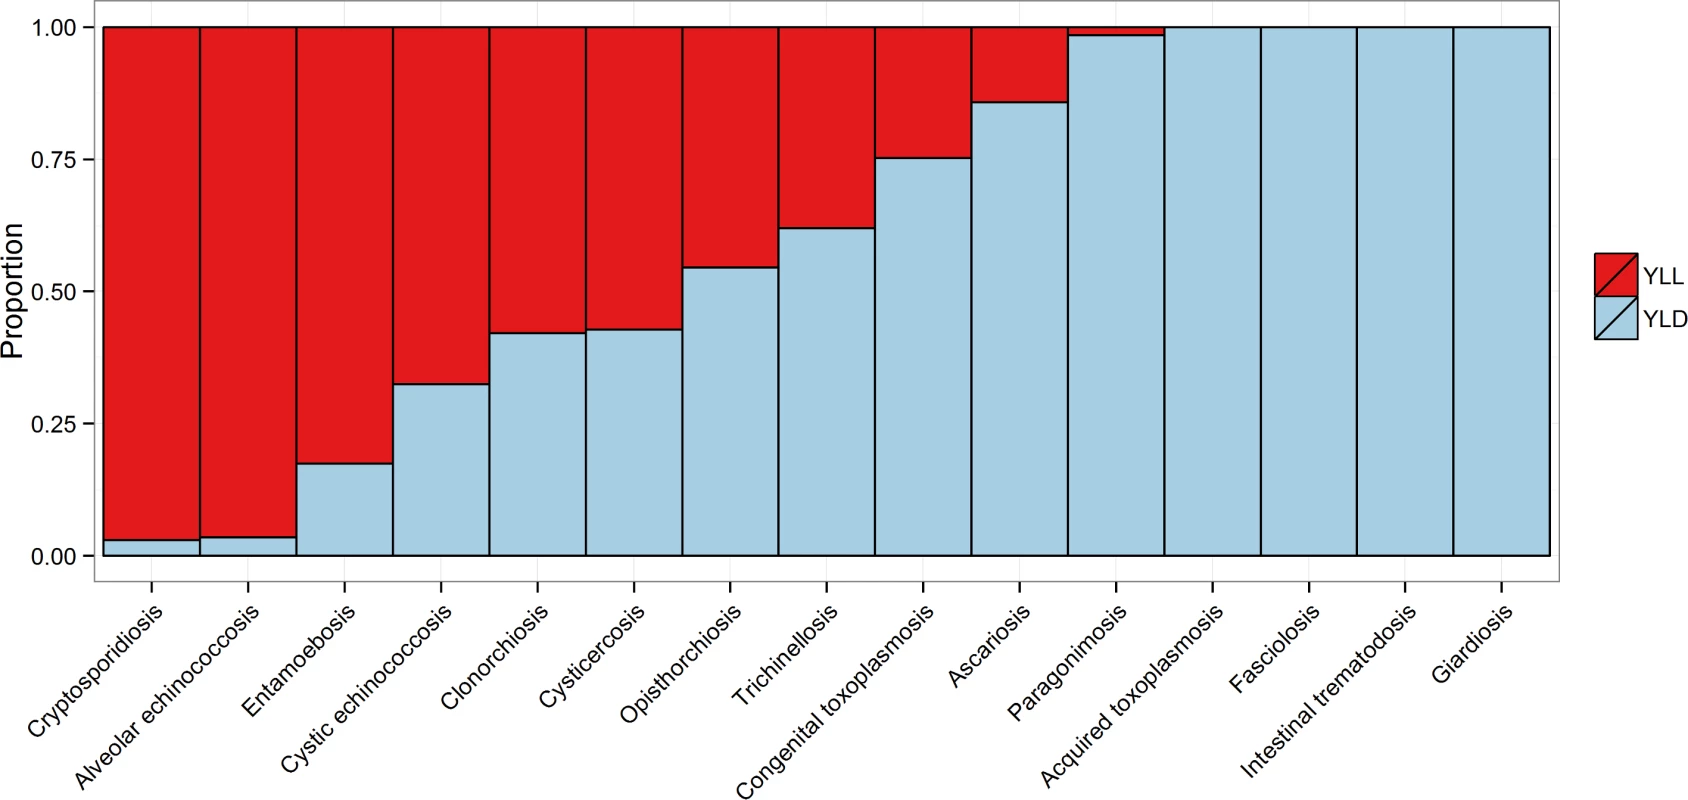 The relative proportion of the burden of each of the foodborne parasitic diseases contributed by YLLs and YLDs.